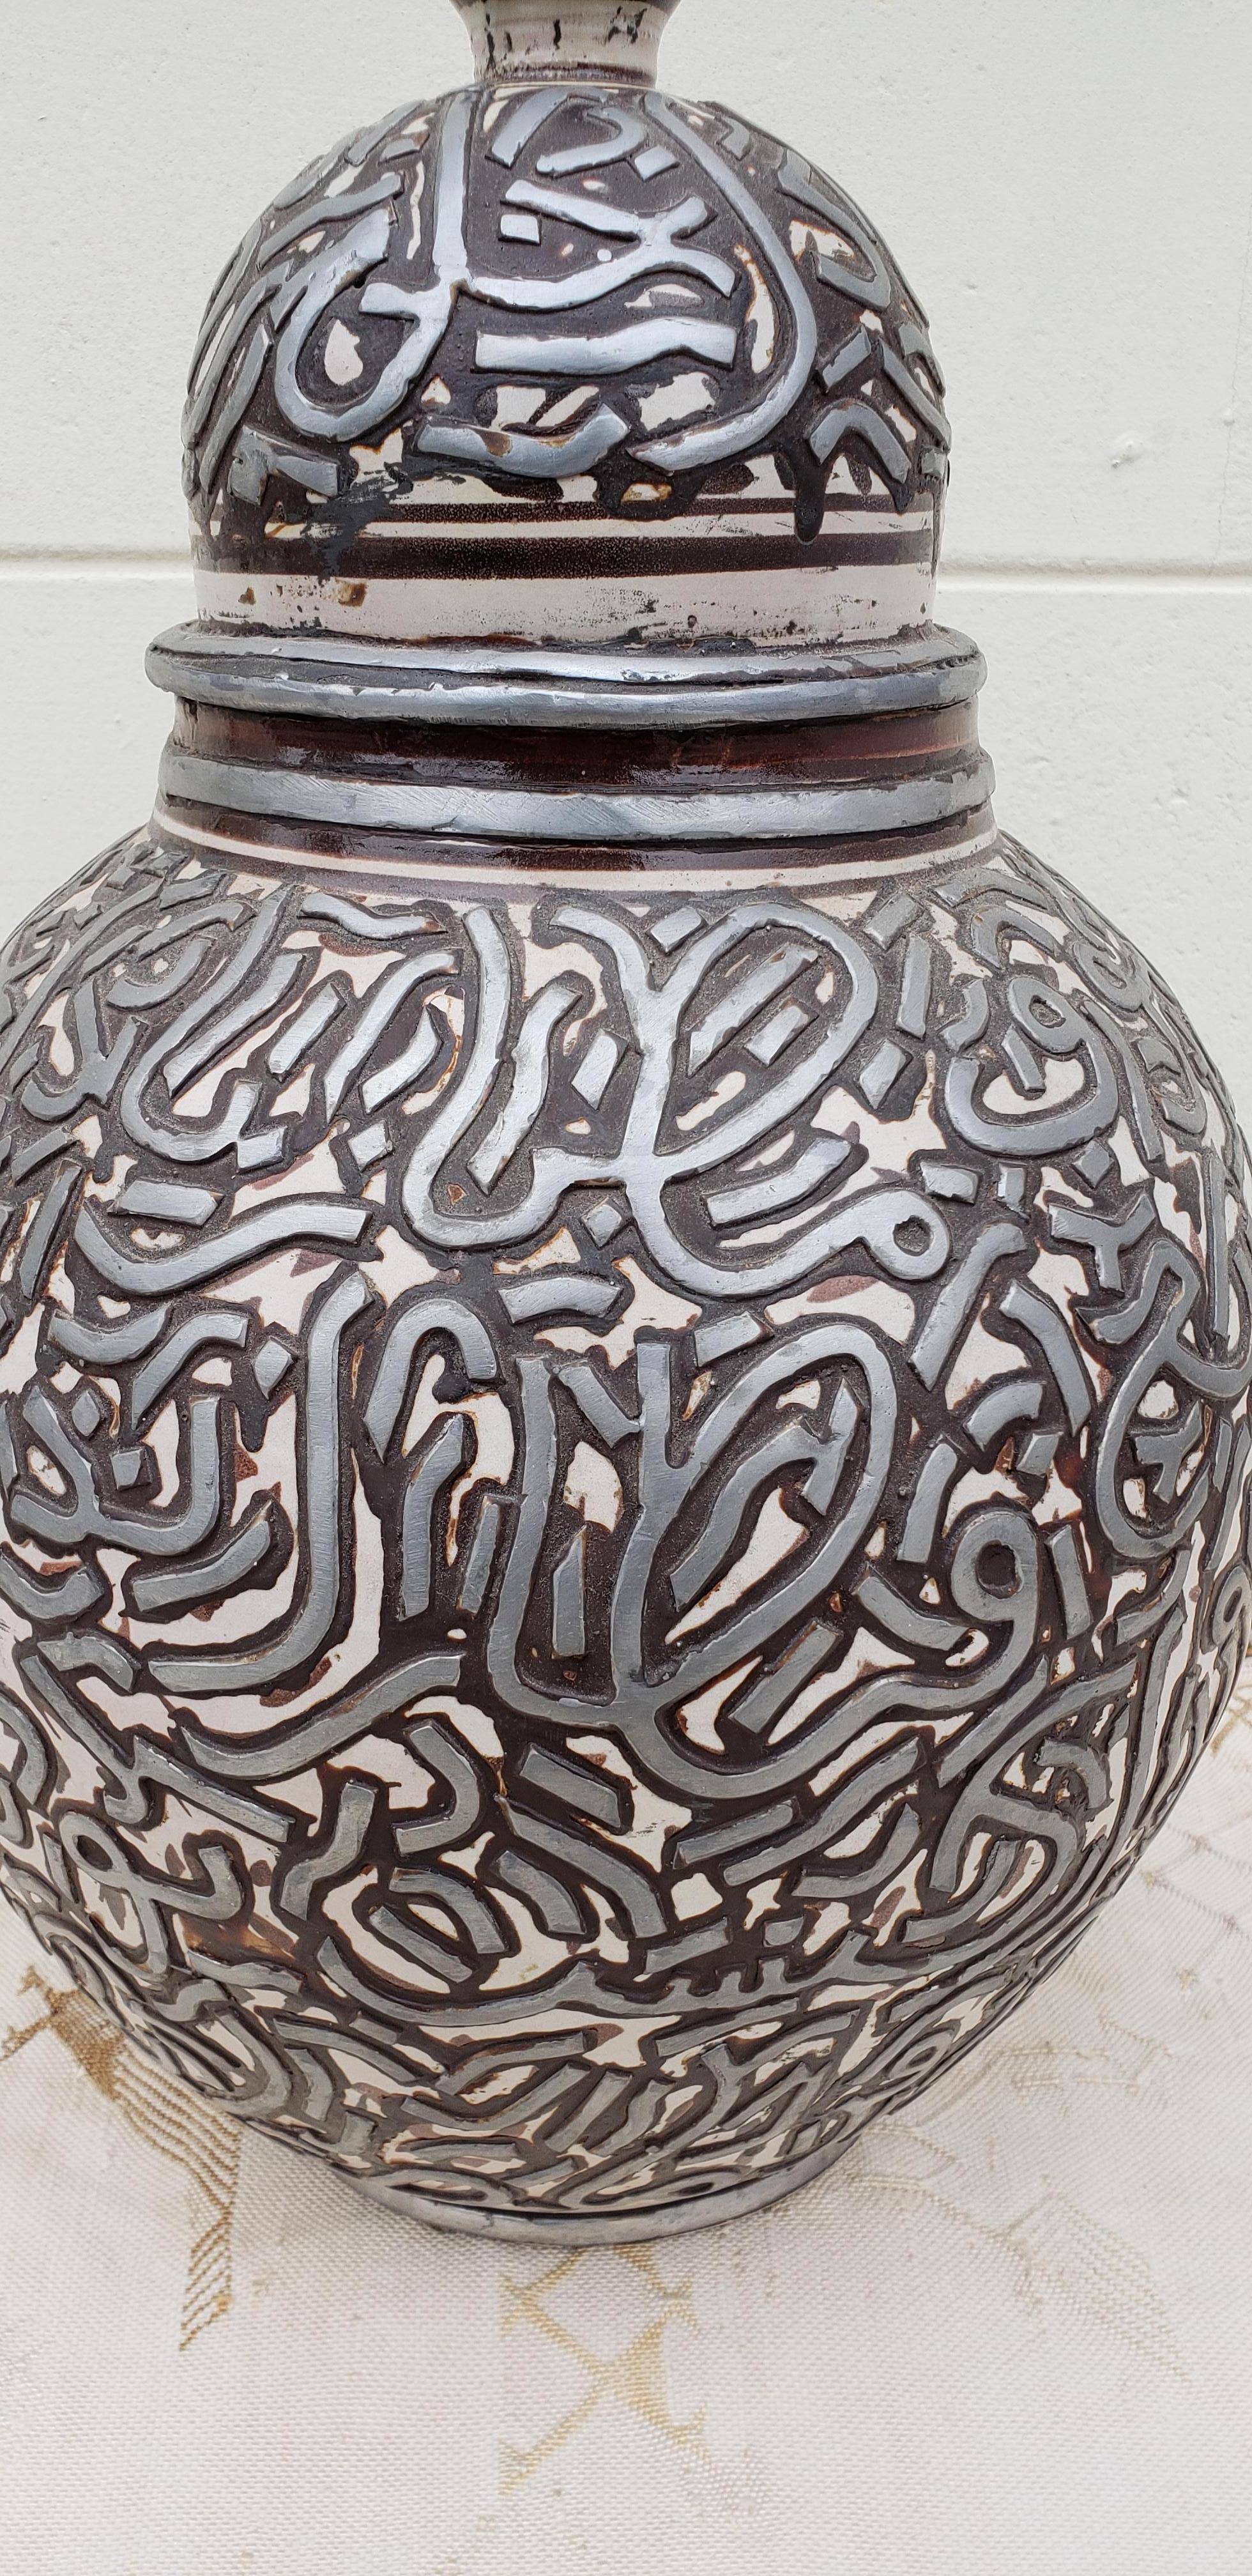 Made in Fez, Morocco, this incredible silver vase is adorned with relief metal, giving it a very exotic look, and making it a great add-on to any decor. Can be used as a beautiful centrepiece, above a mantle, a shelf, or a cabinet / armoire. Very